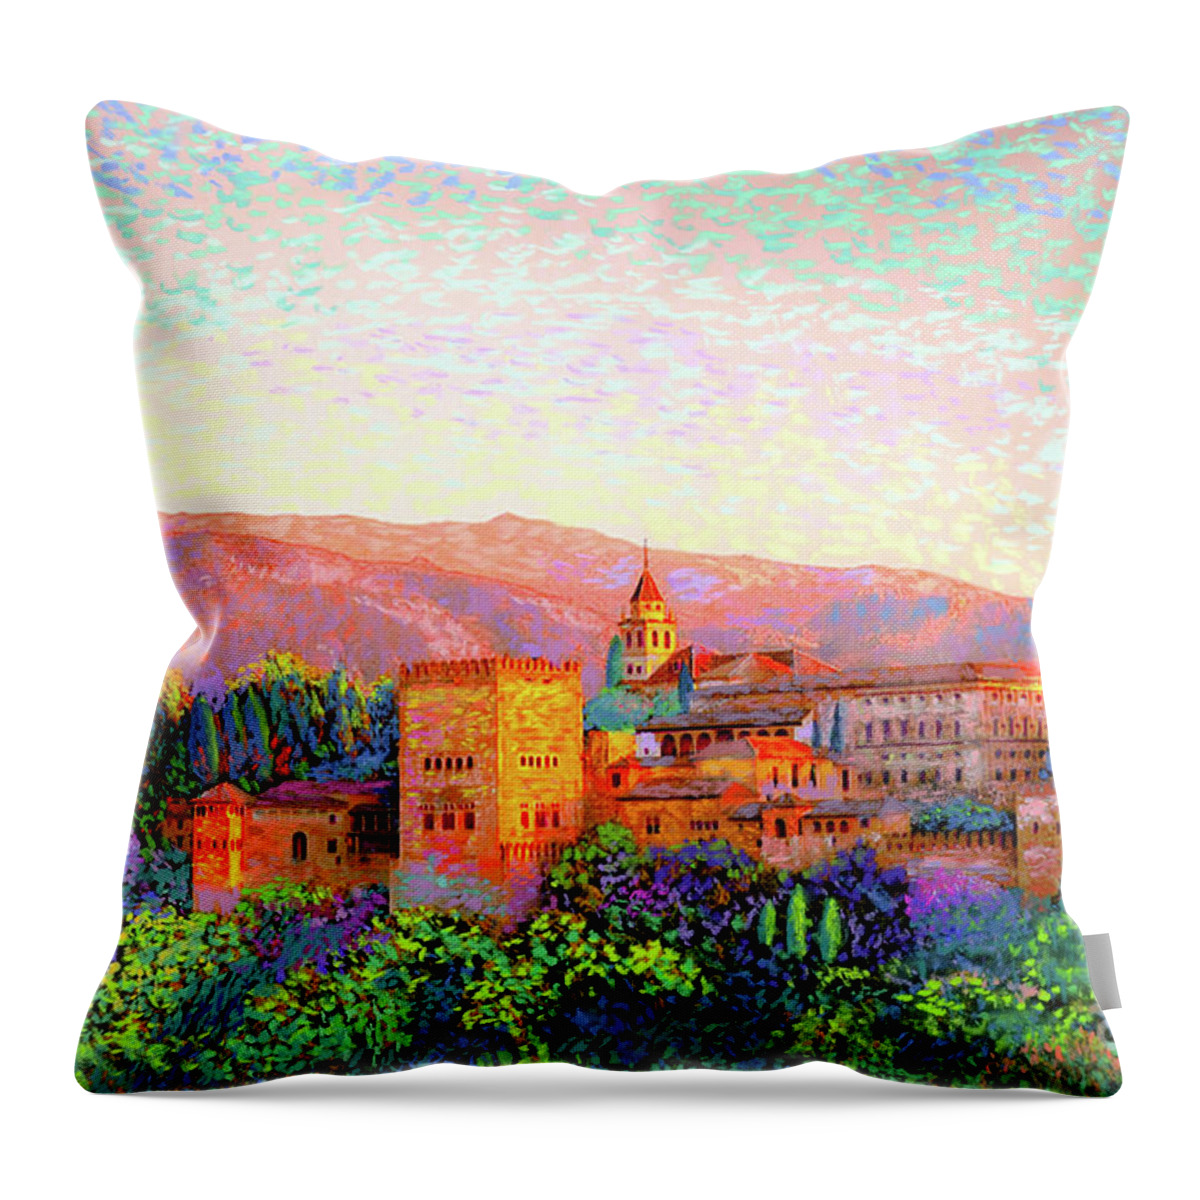 Spain Throw Pillow featuring the painting Alhambra, Granada, Spain by Jane Small